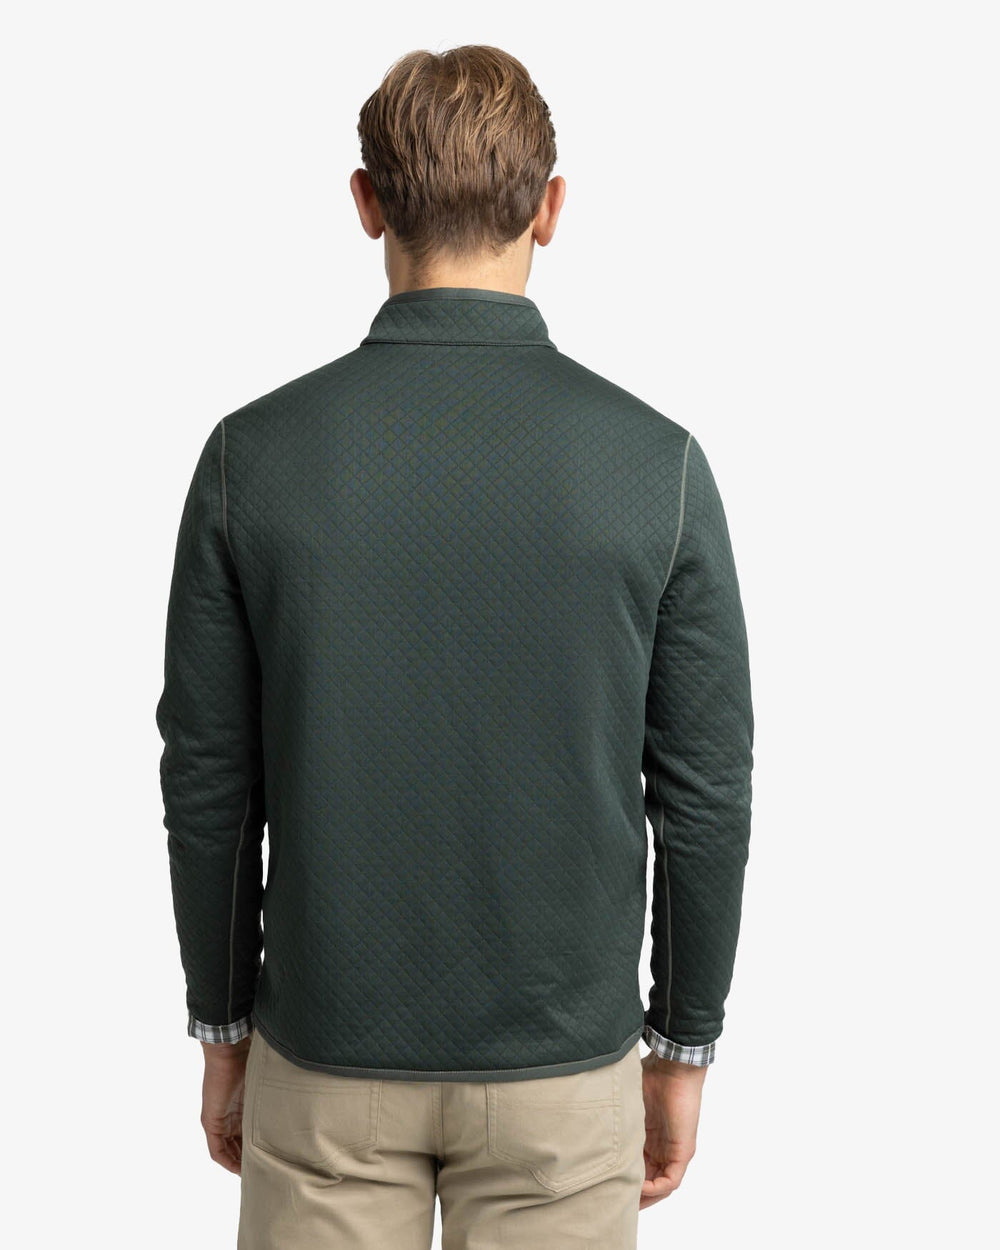 The back view of the Southern Tide Arden Reversible Quarter Zip by Southern Tide - Gulf Green